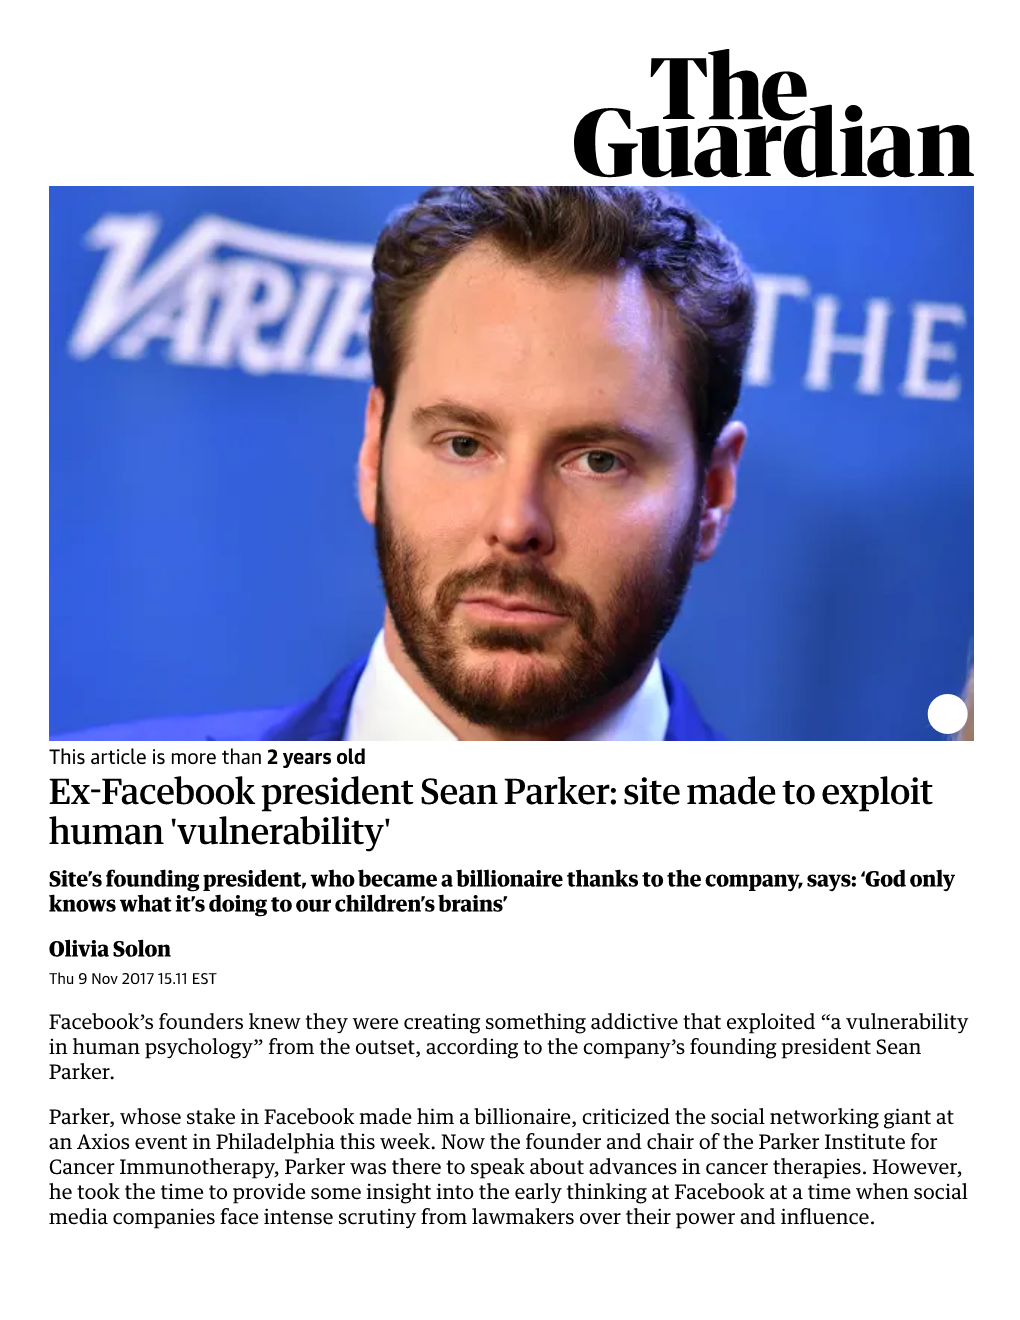 Ex Facebook President Sean Parker: Site Made to Exploit Human